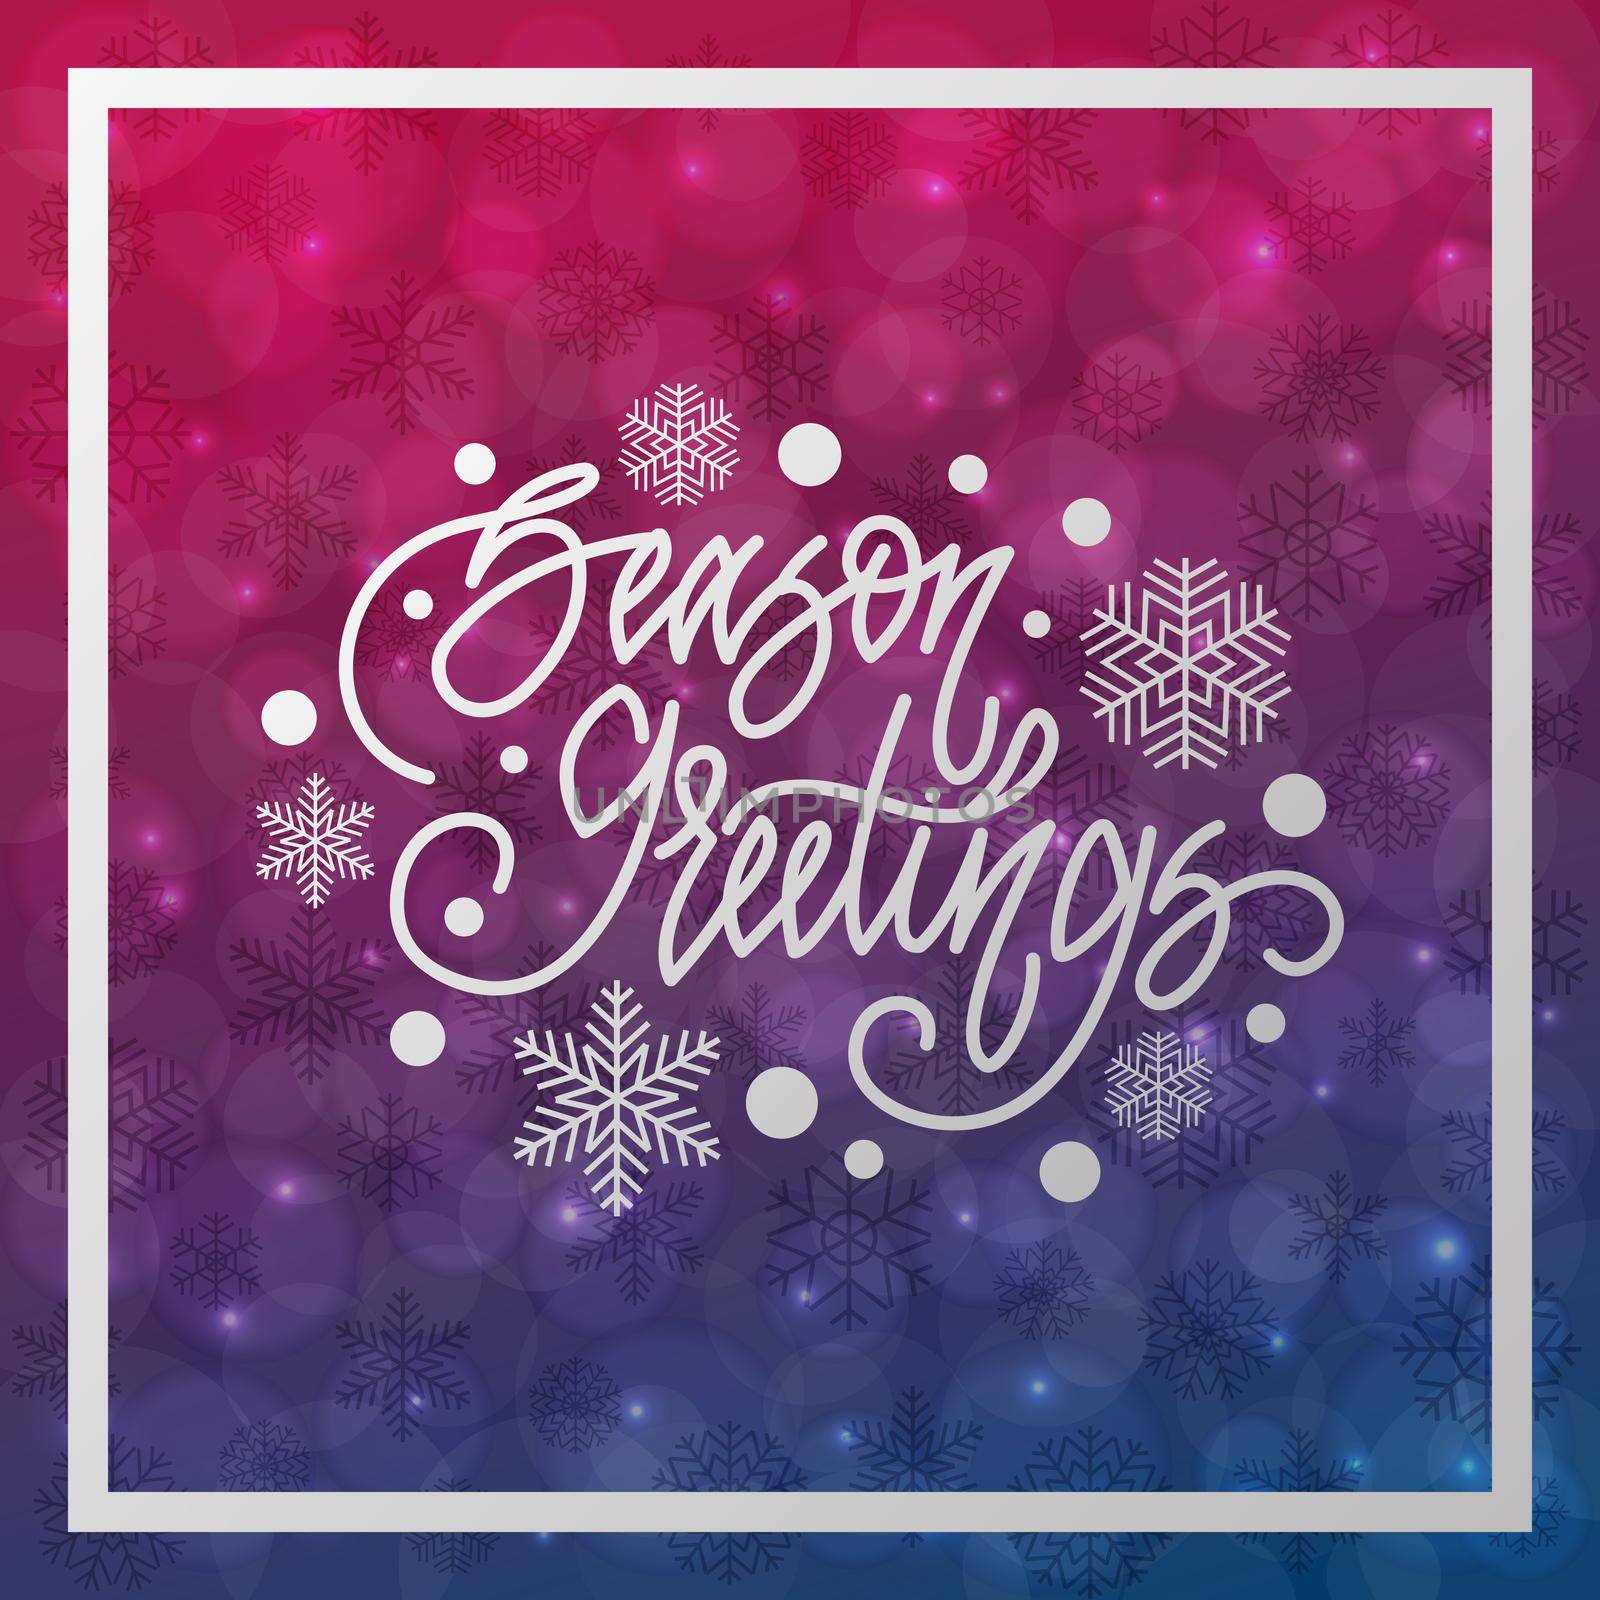 Season greetings. Handwritten lettering on blurred bokeh background. illustrations for greeting cards, invitations, posters, web banners and much more.